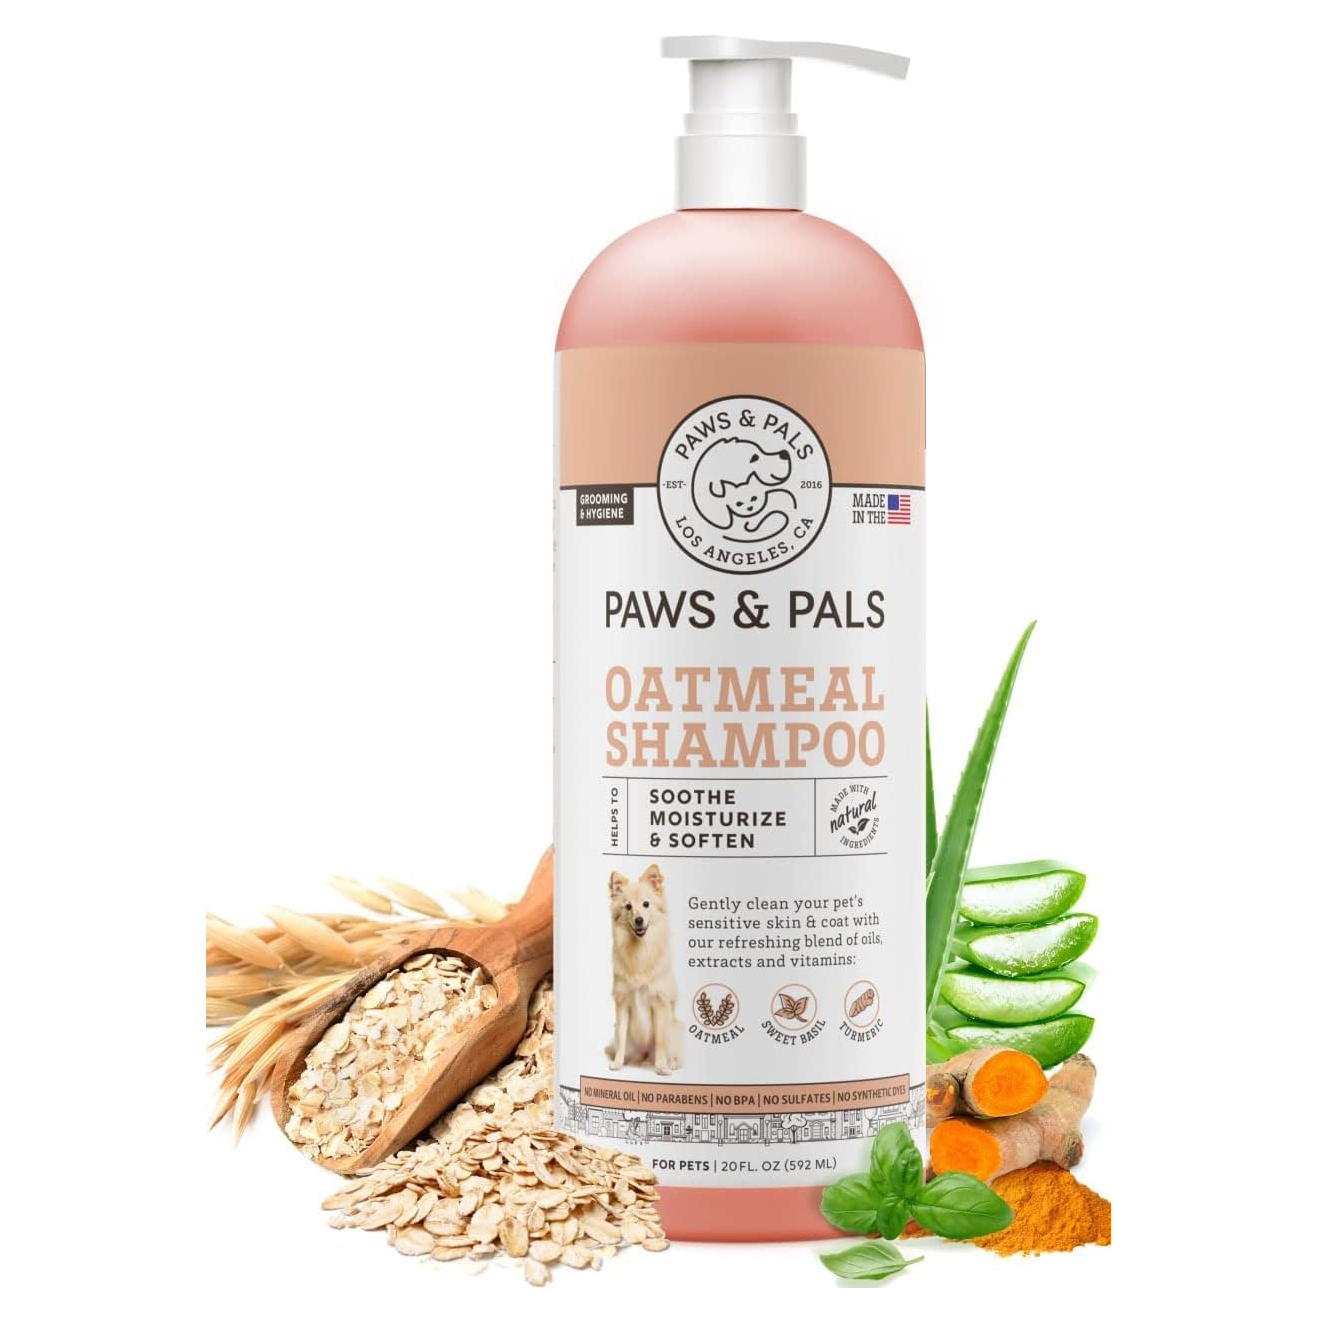 Paws & Pals Oatmeal Shampoo for Dogs & Cats